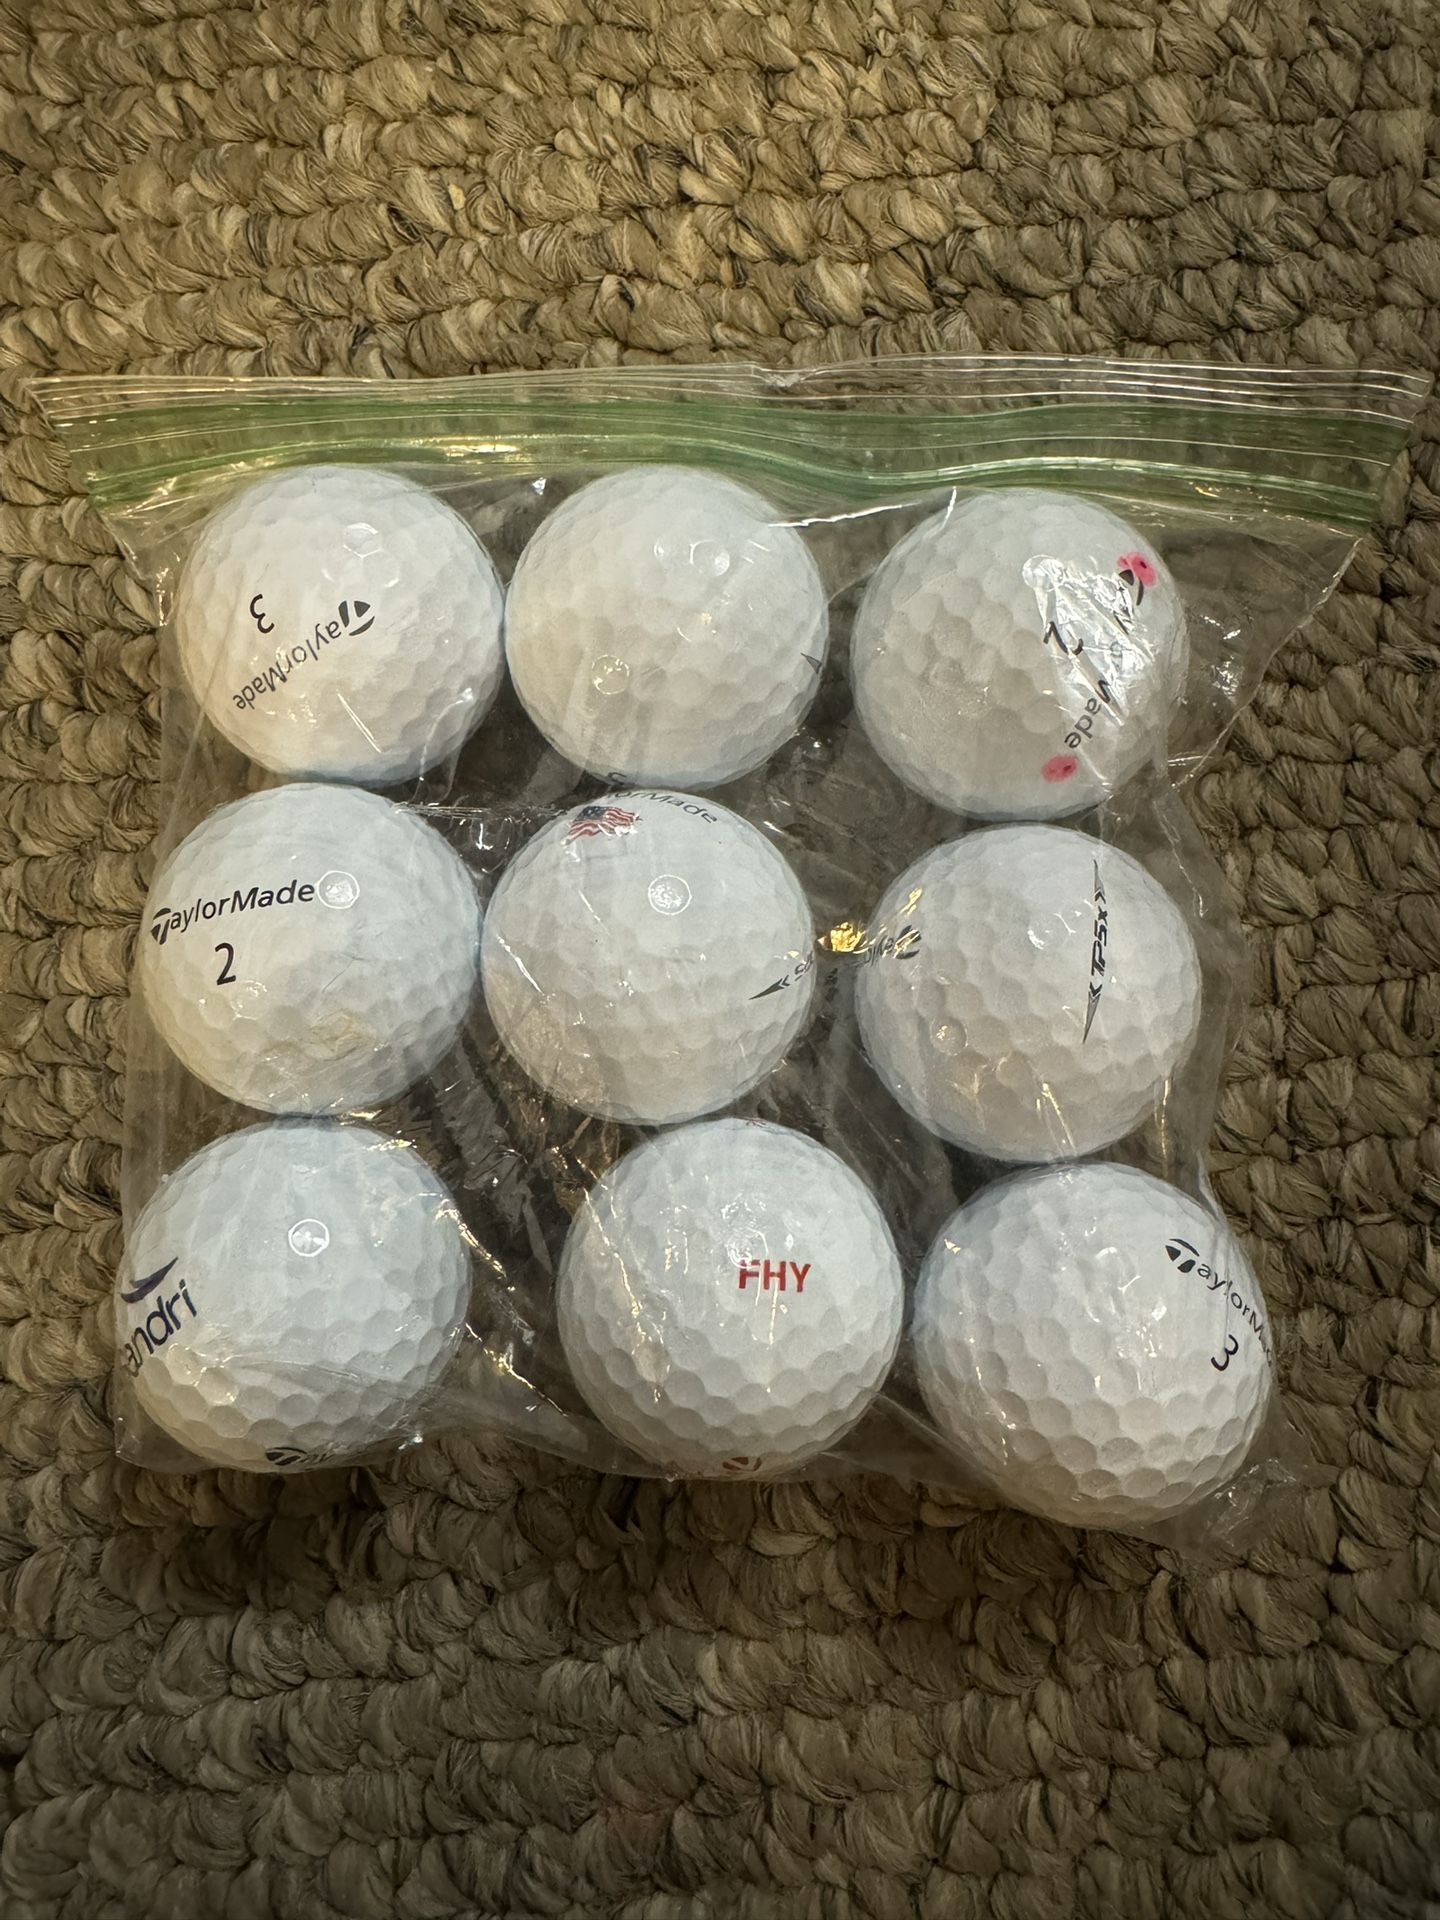 Used Taylormade TP5X Golf Balls